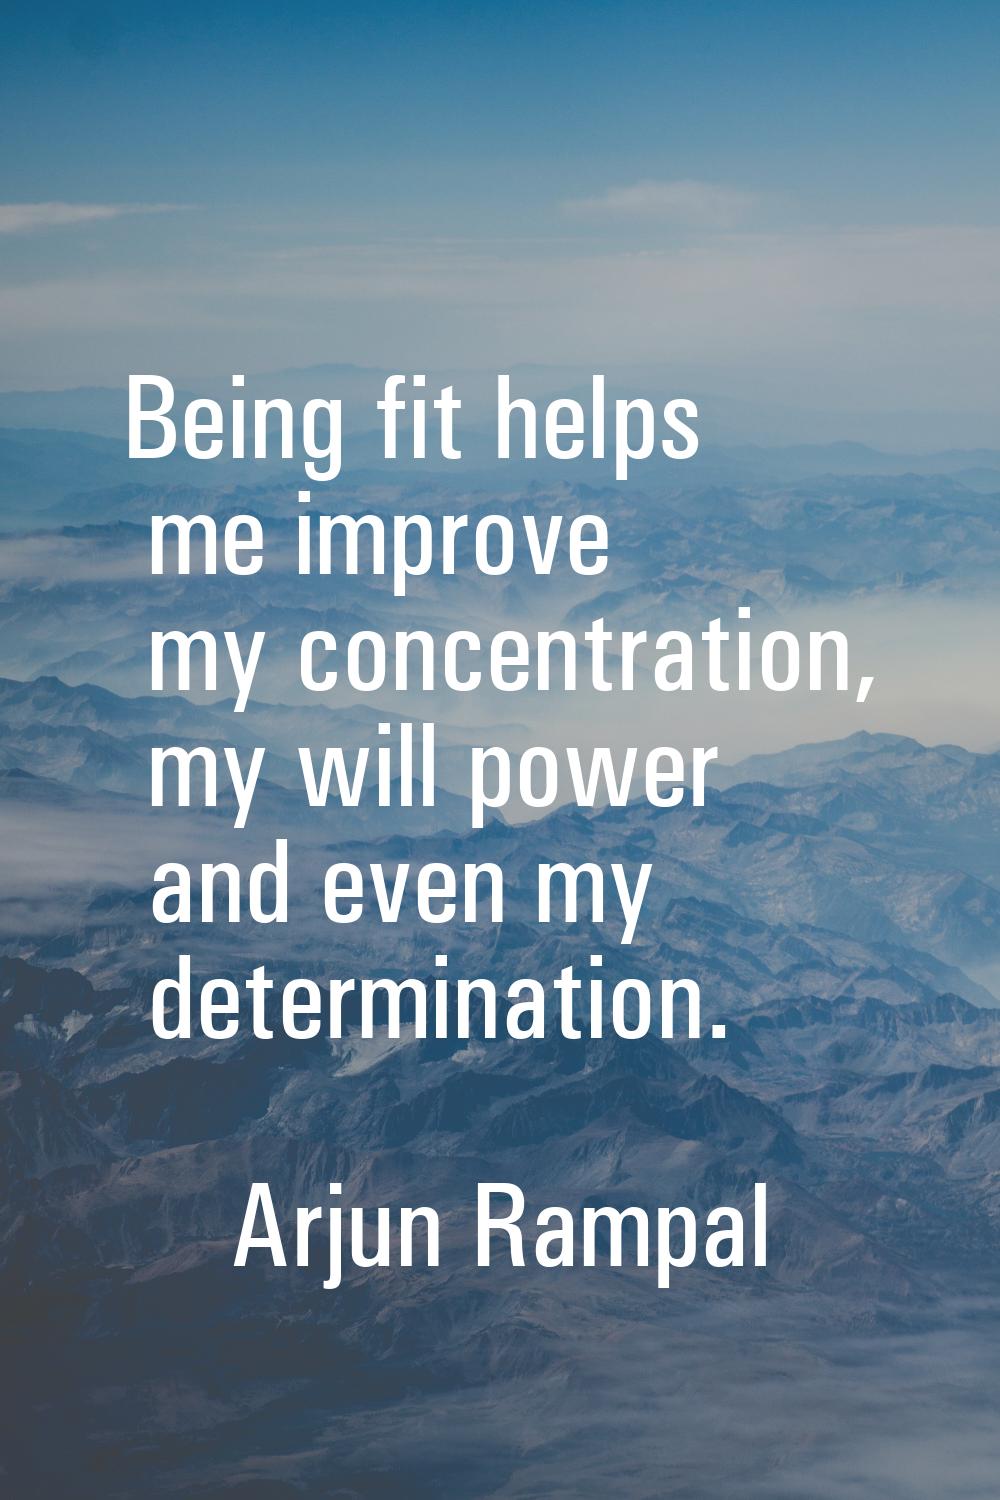 Being fit helps me improve my concentration, my will power and even my determination.